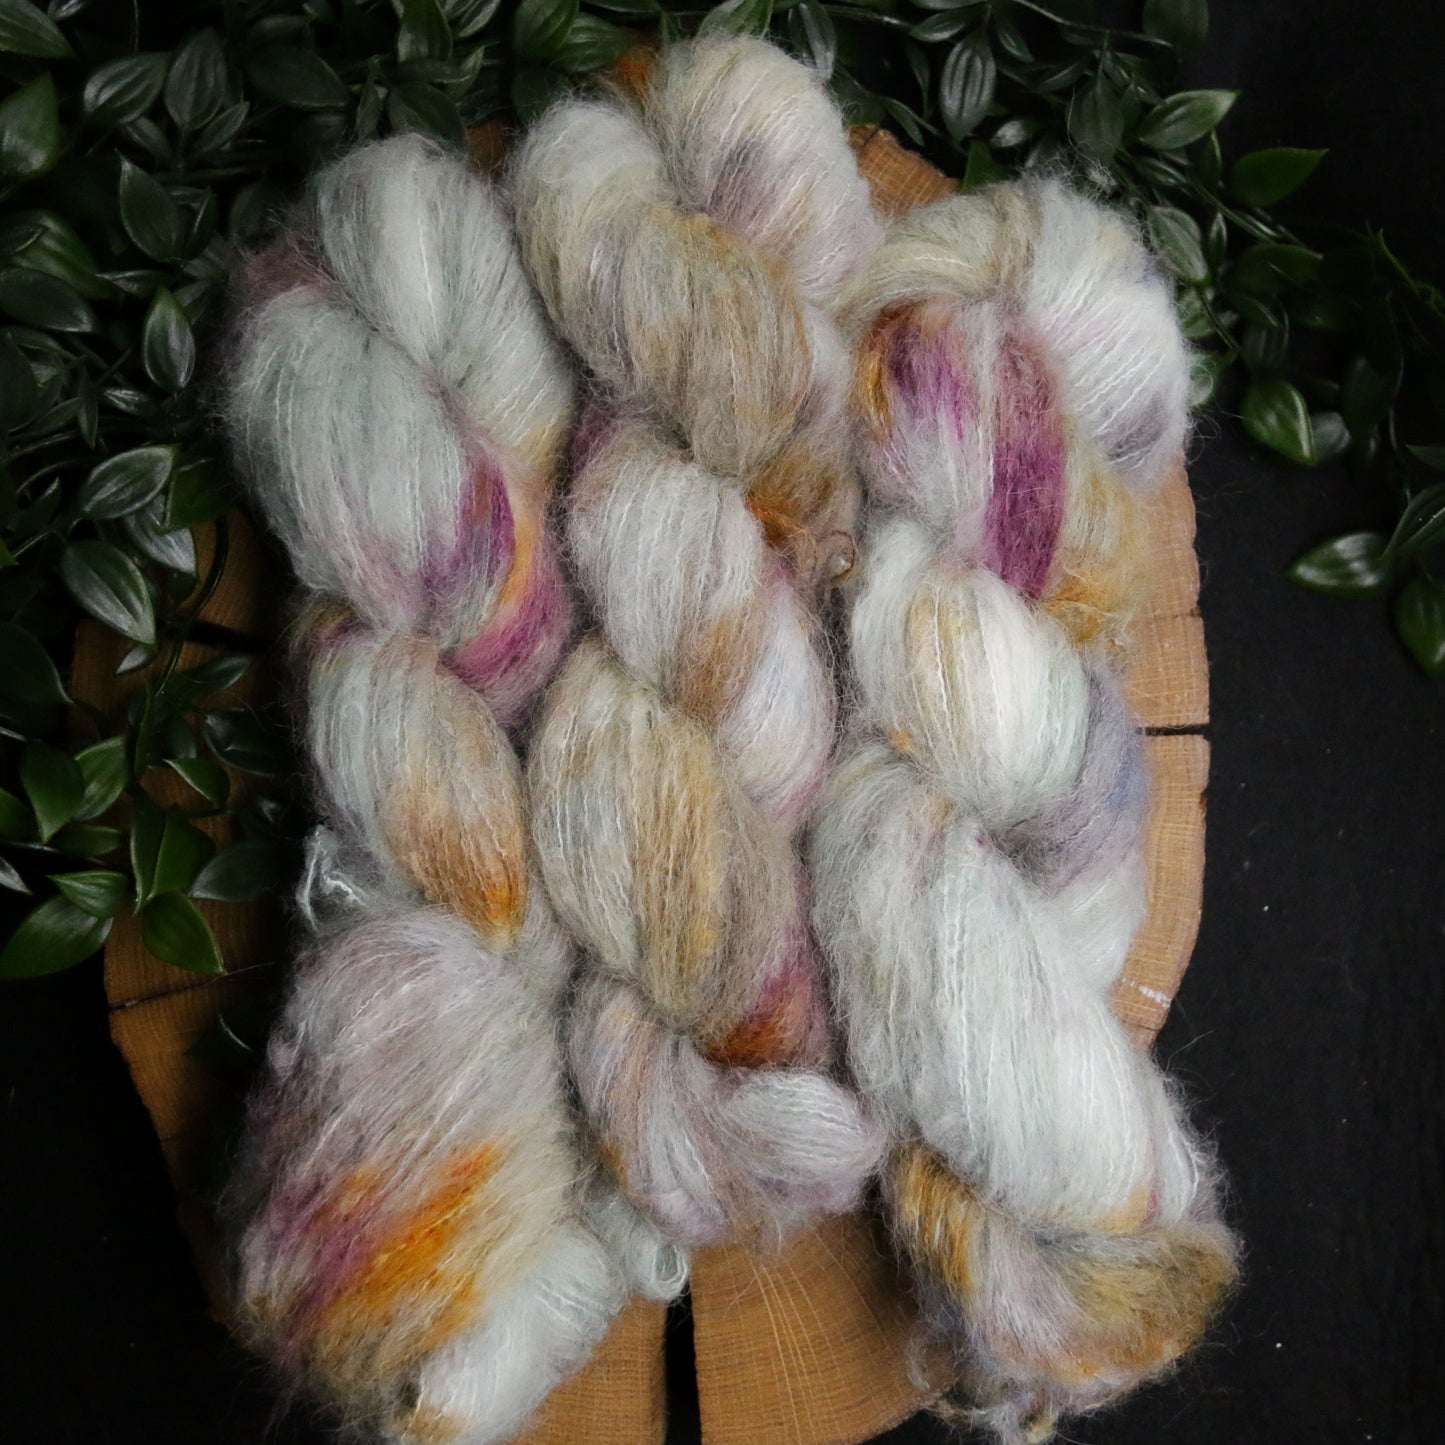 Overlander Mountain - Sweater Quantity and Dyed to Order